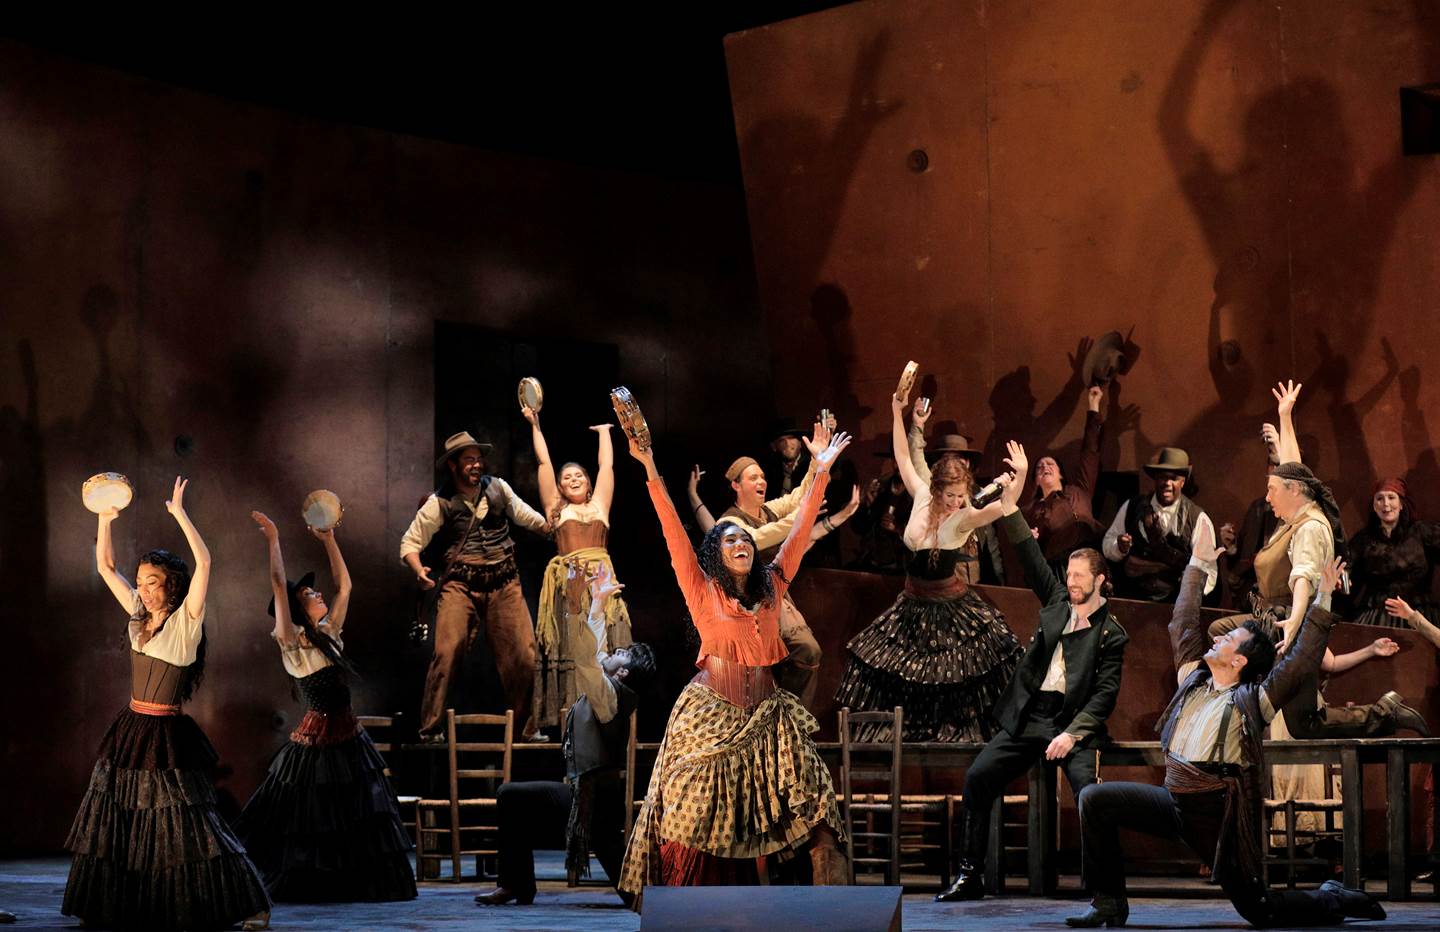 Cast of Carmen with their hands in the air, standing on chairs and tables